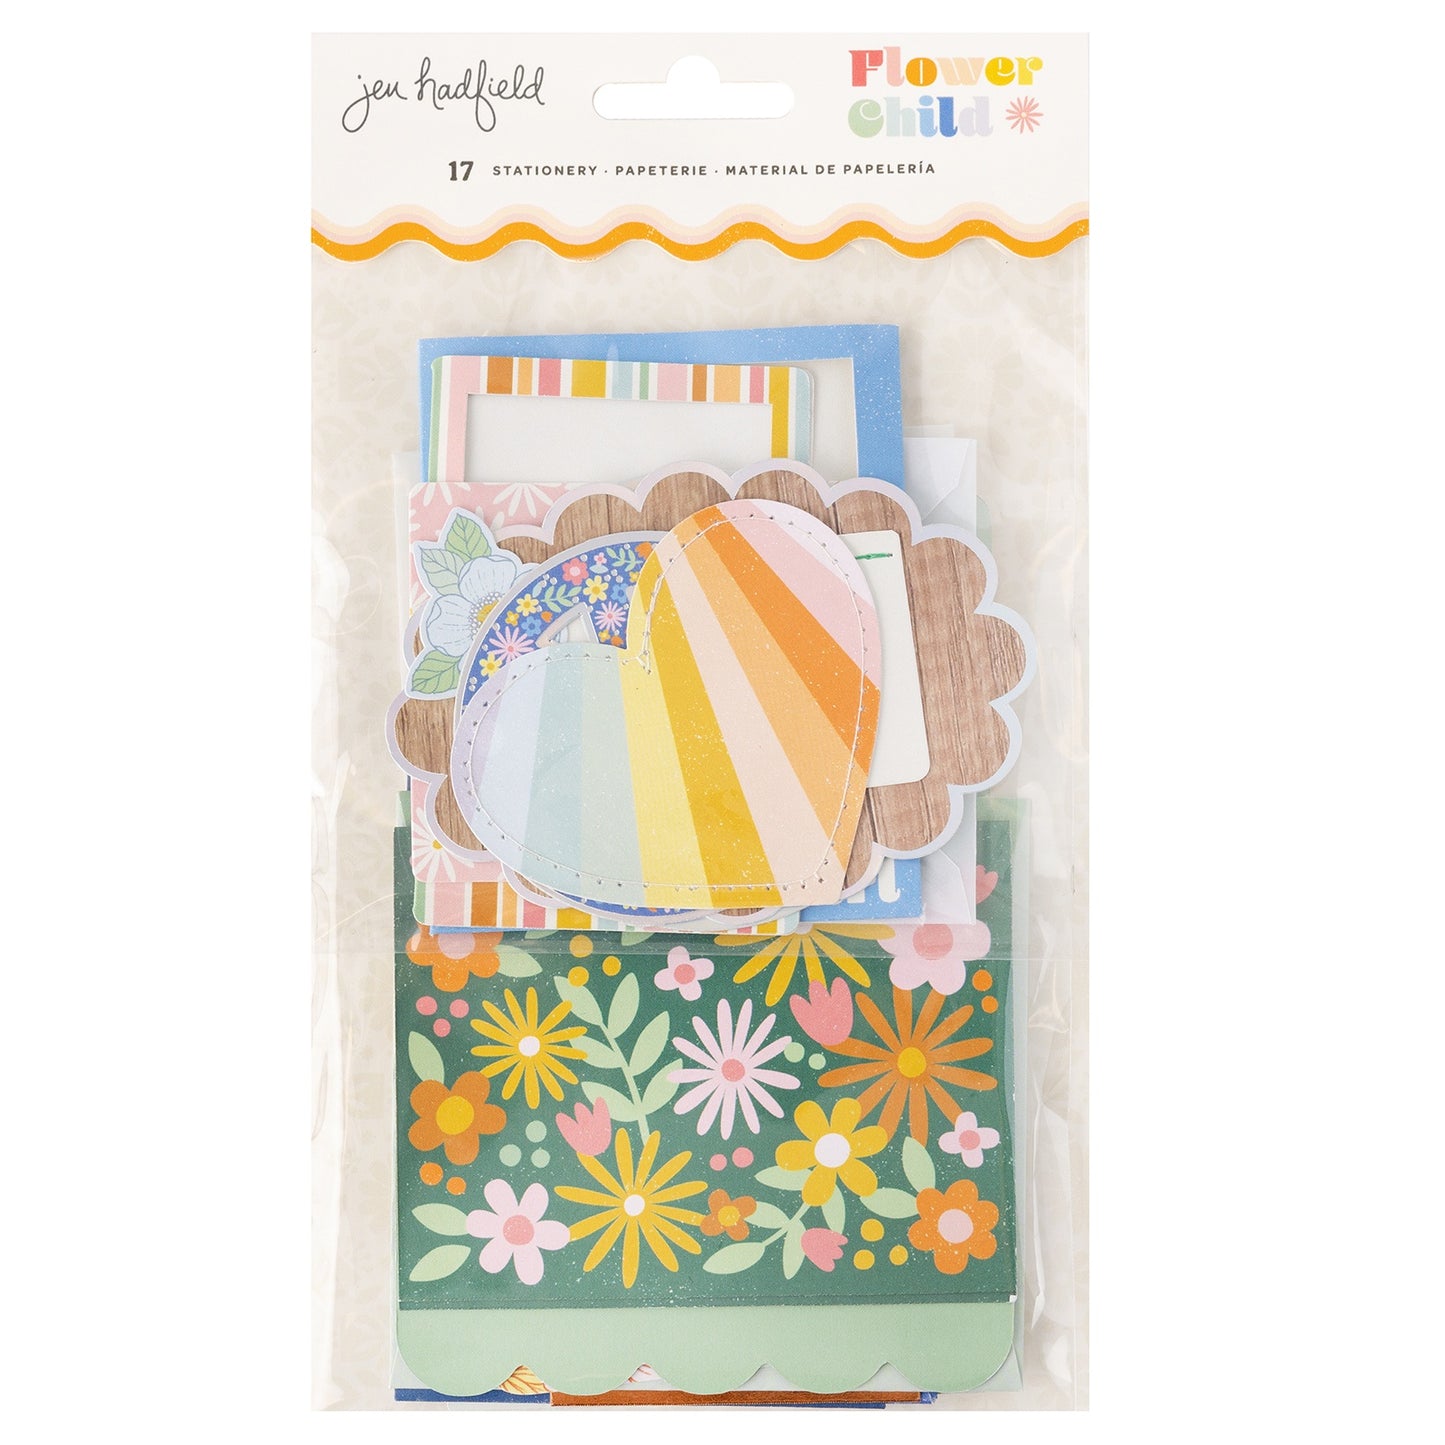 Jen Hadfield Flower Child Stationery Pack-W/Silver Holographic Foil